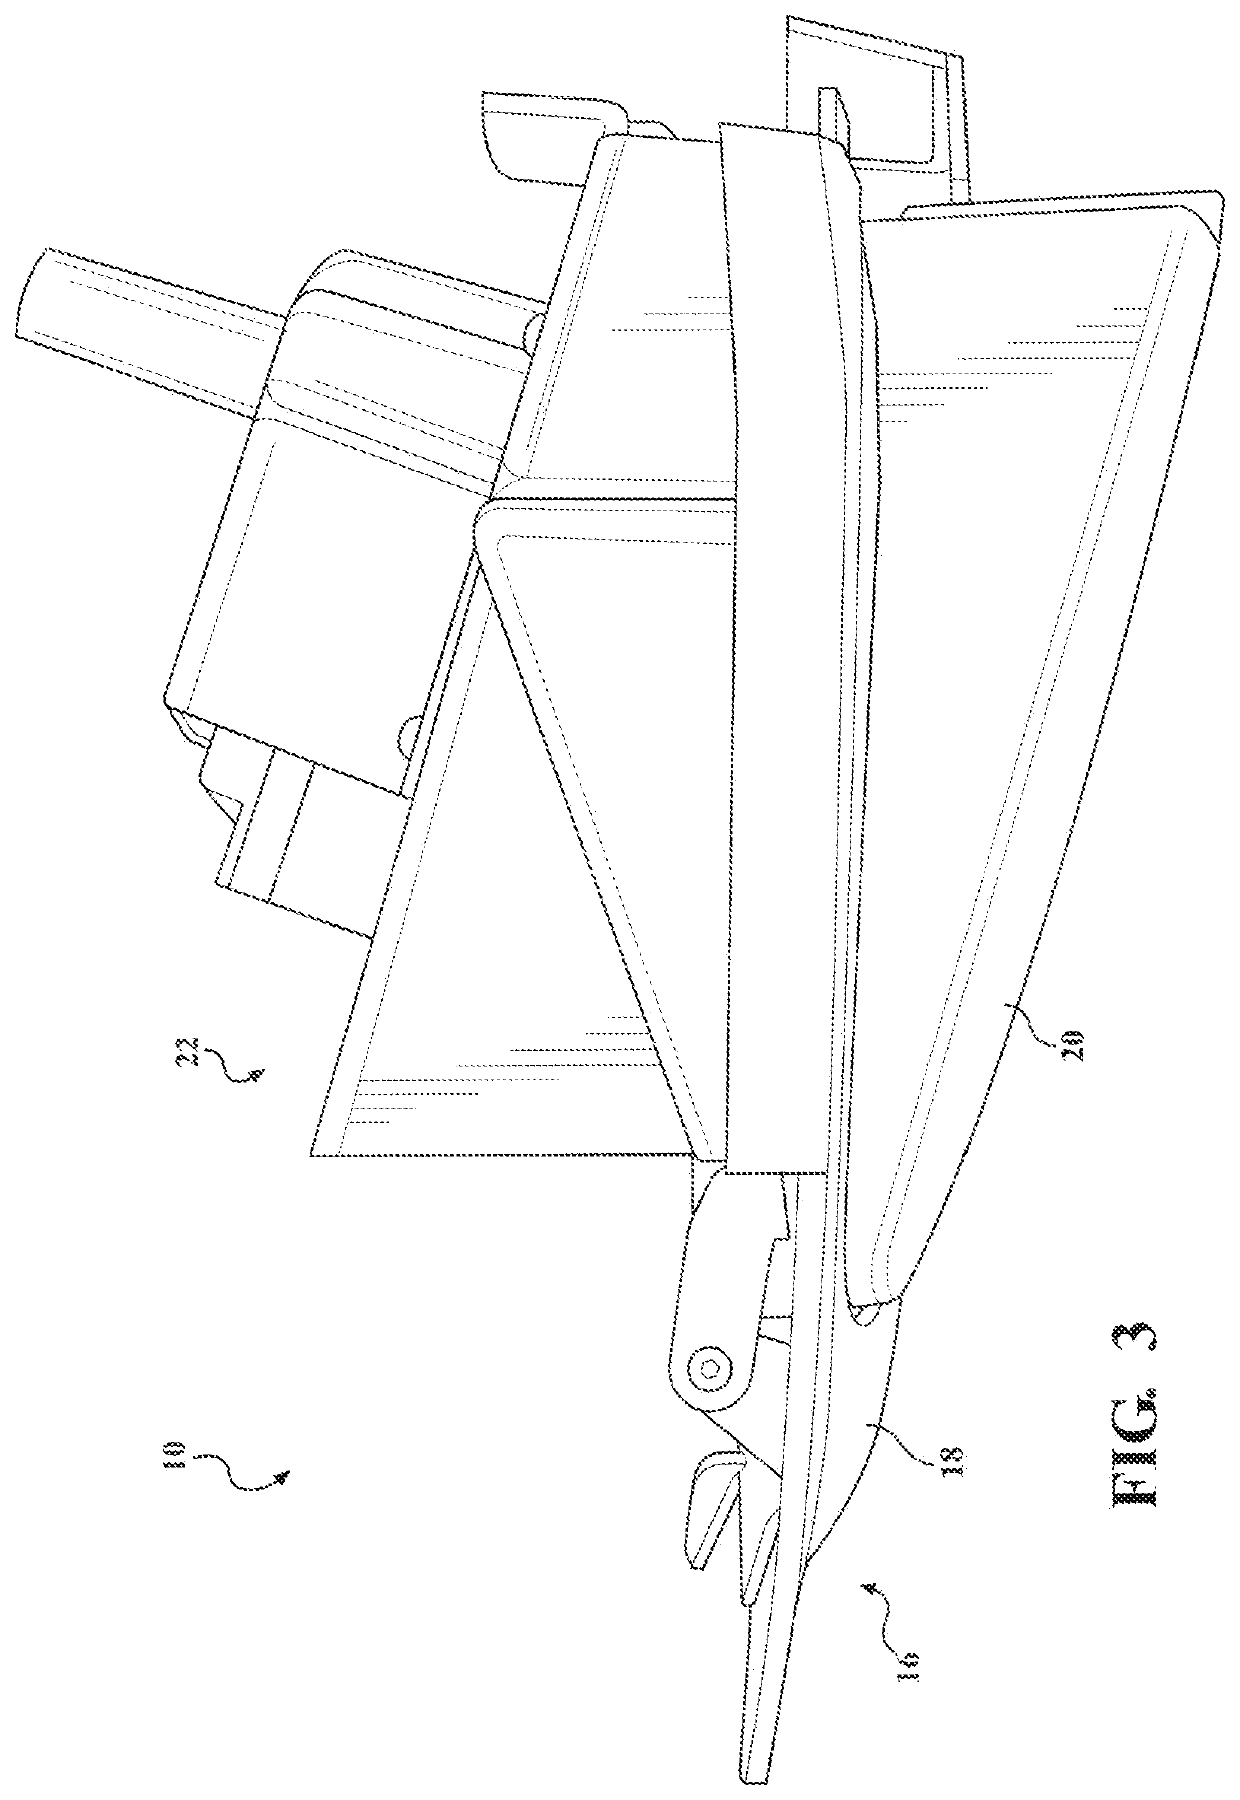 Active front wheel deflector assembly